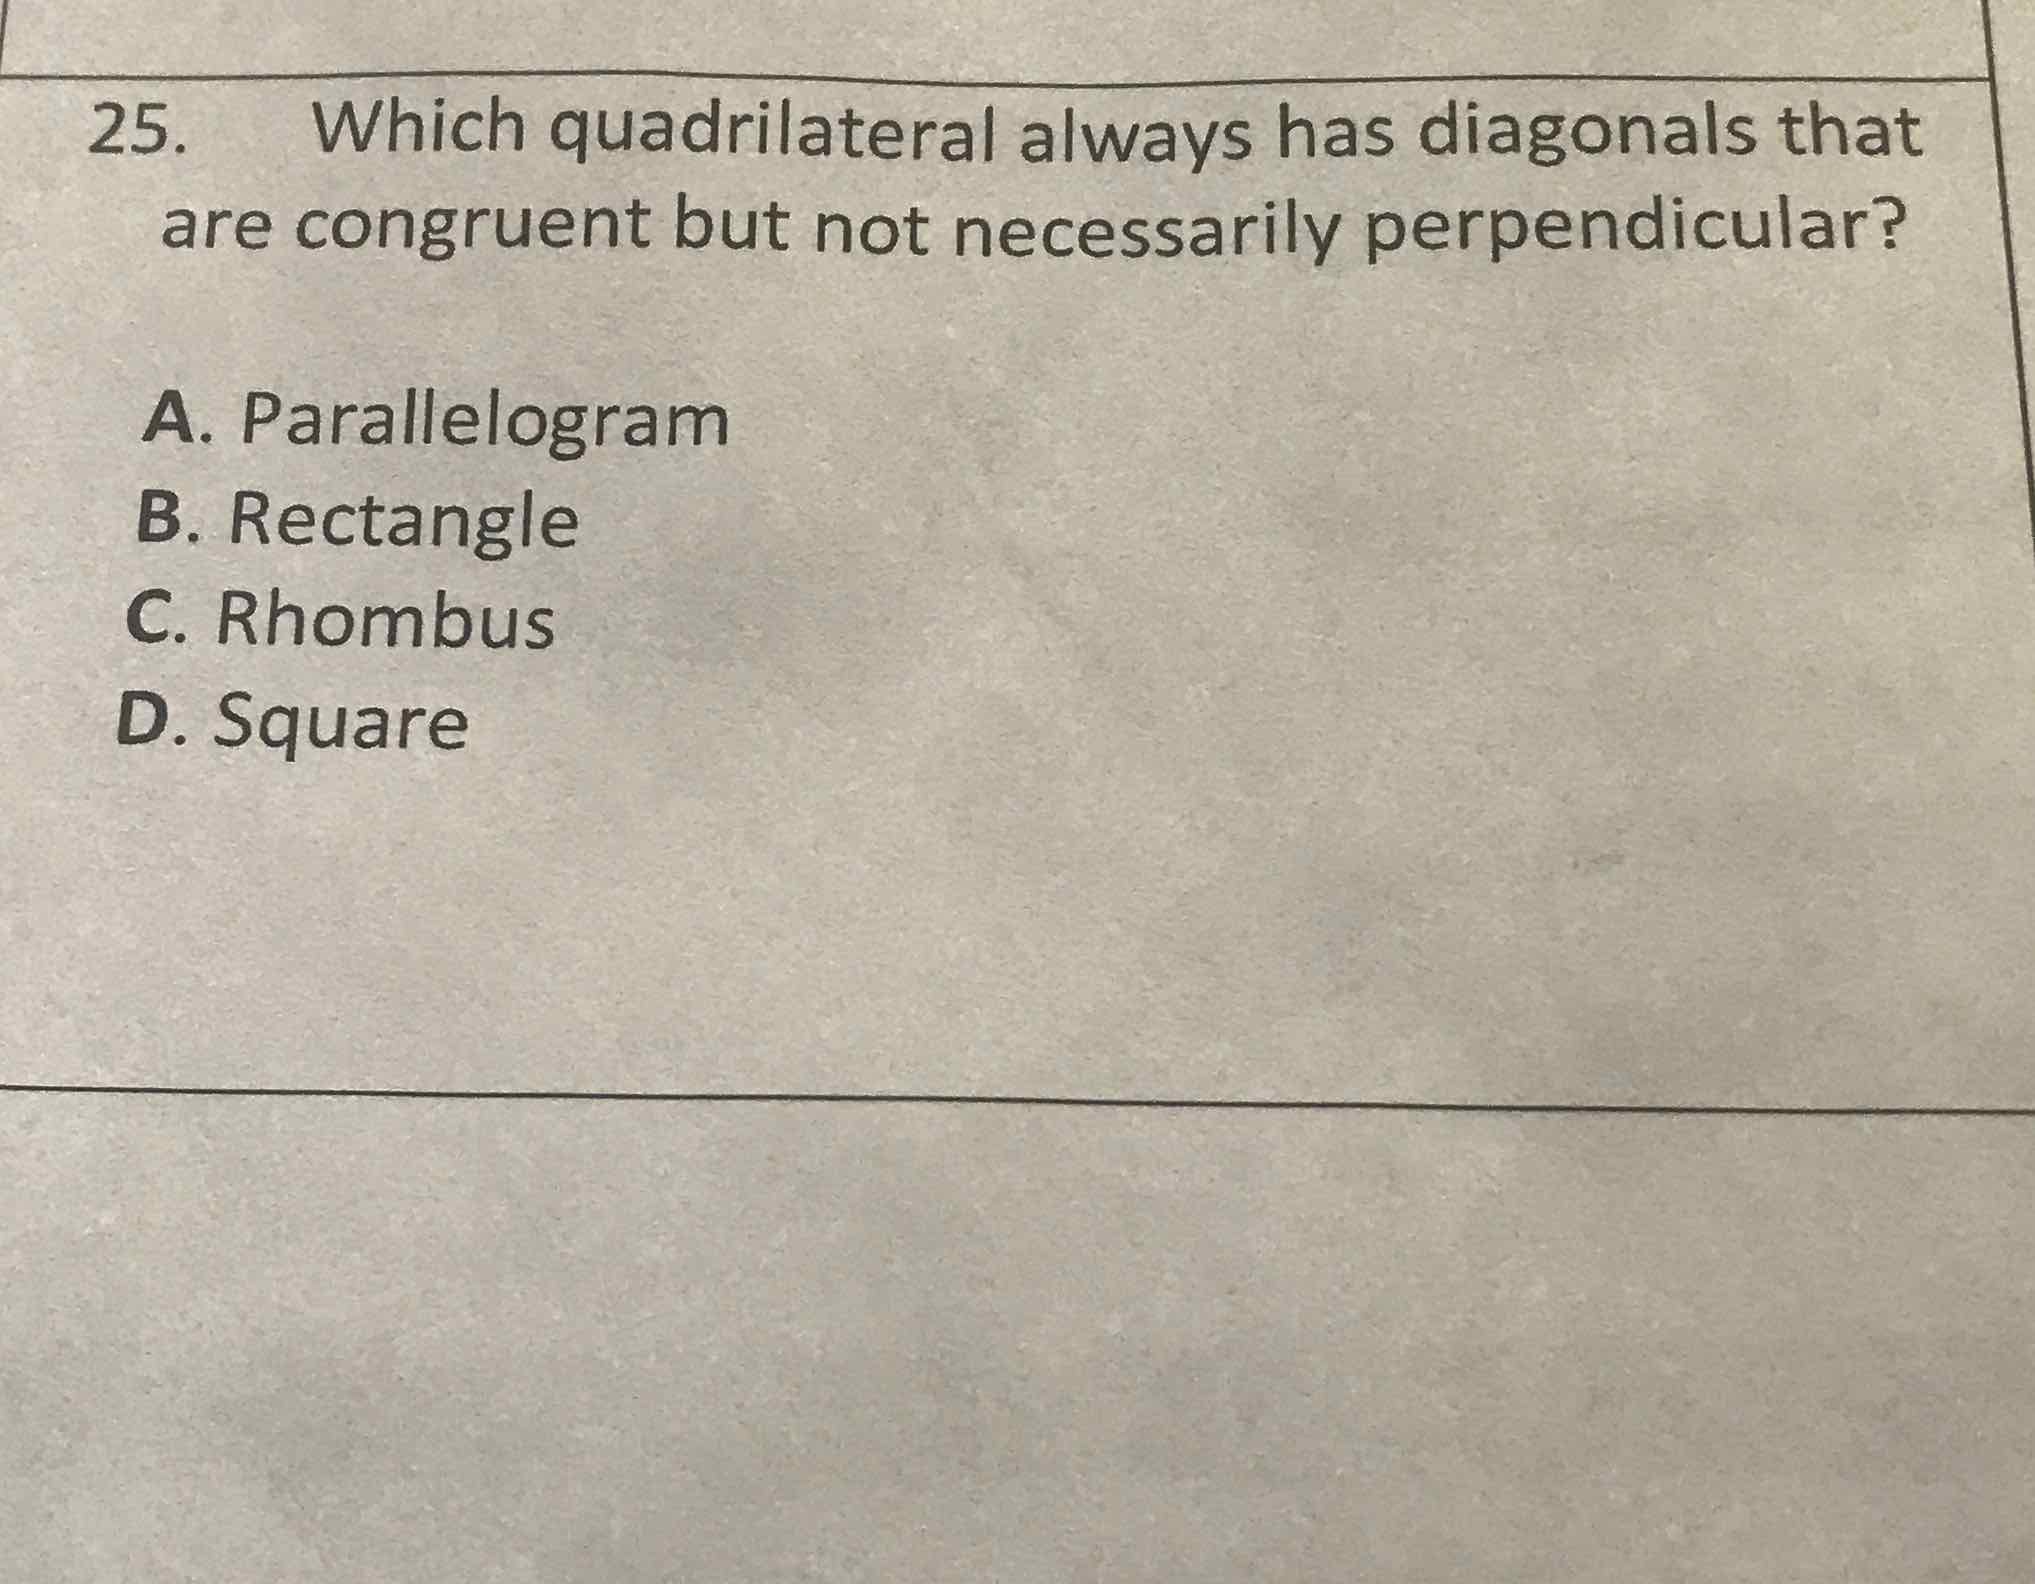 25. Which quadrilateral always has diagonals that are congruent but not necessarily perpendicular?
A. Parallelogram
B. Rectangle
C. Rhombus
D. Square